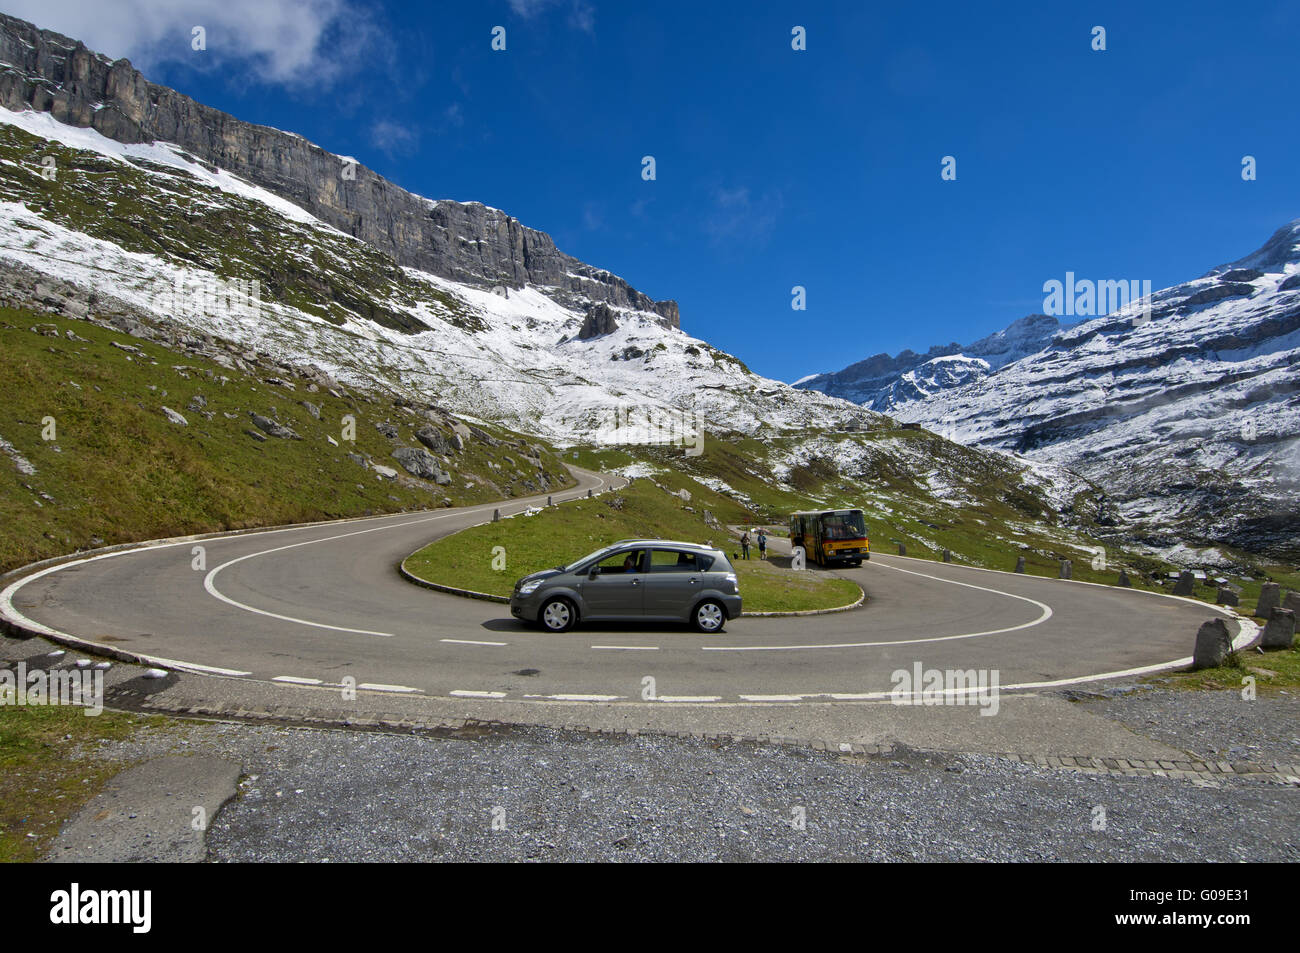 hairpin bend on a mountain road, Switzerland Stock Photo